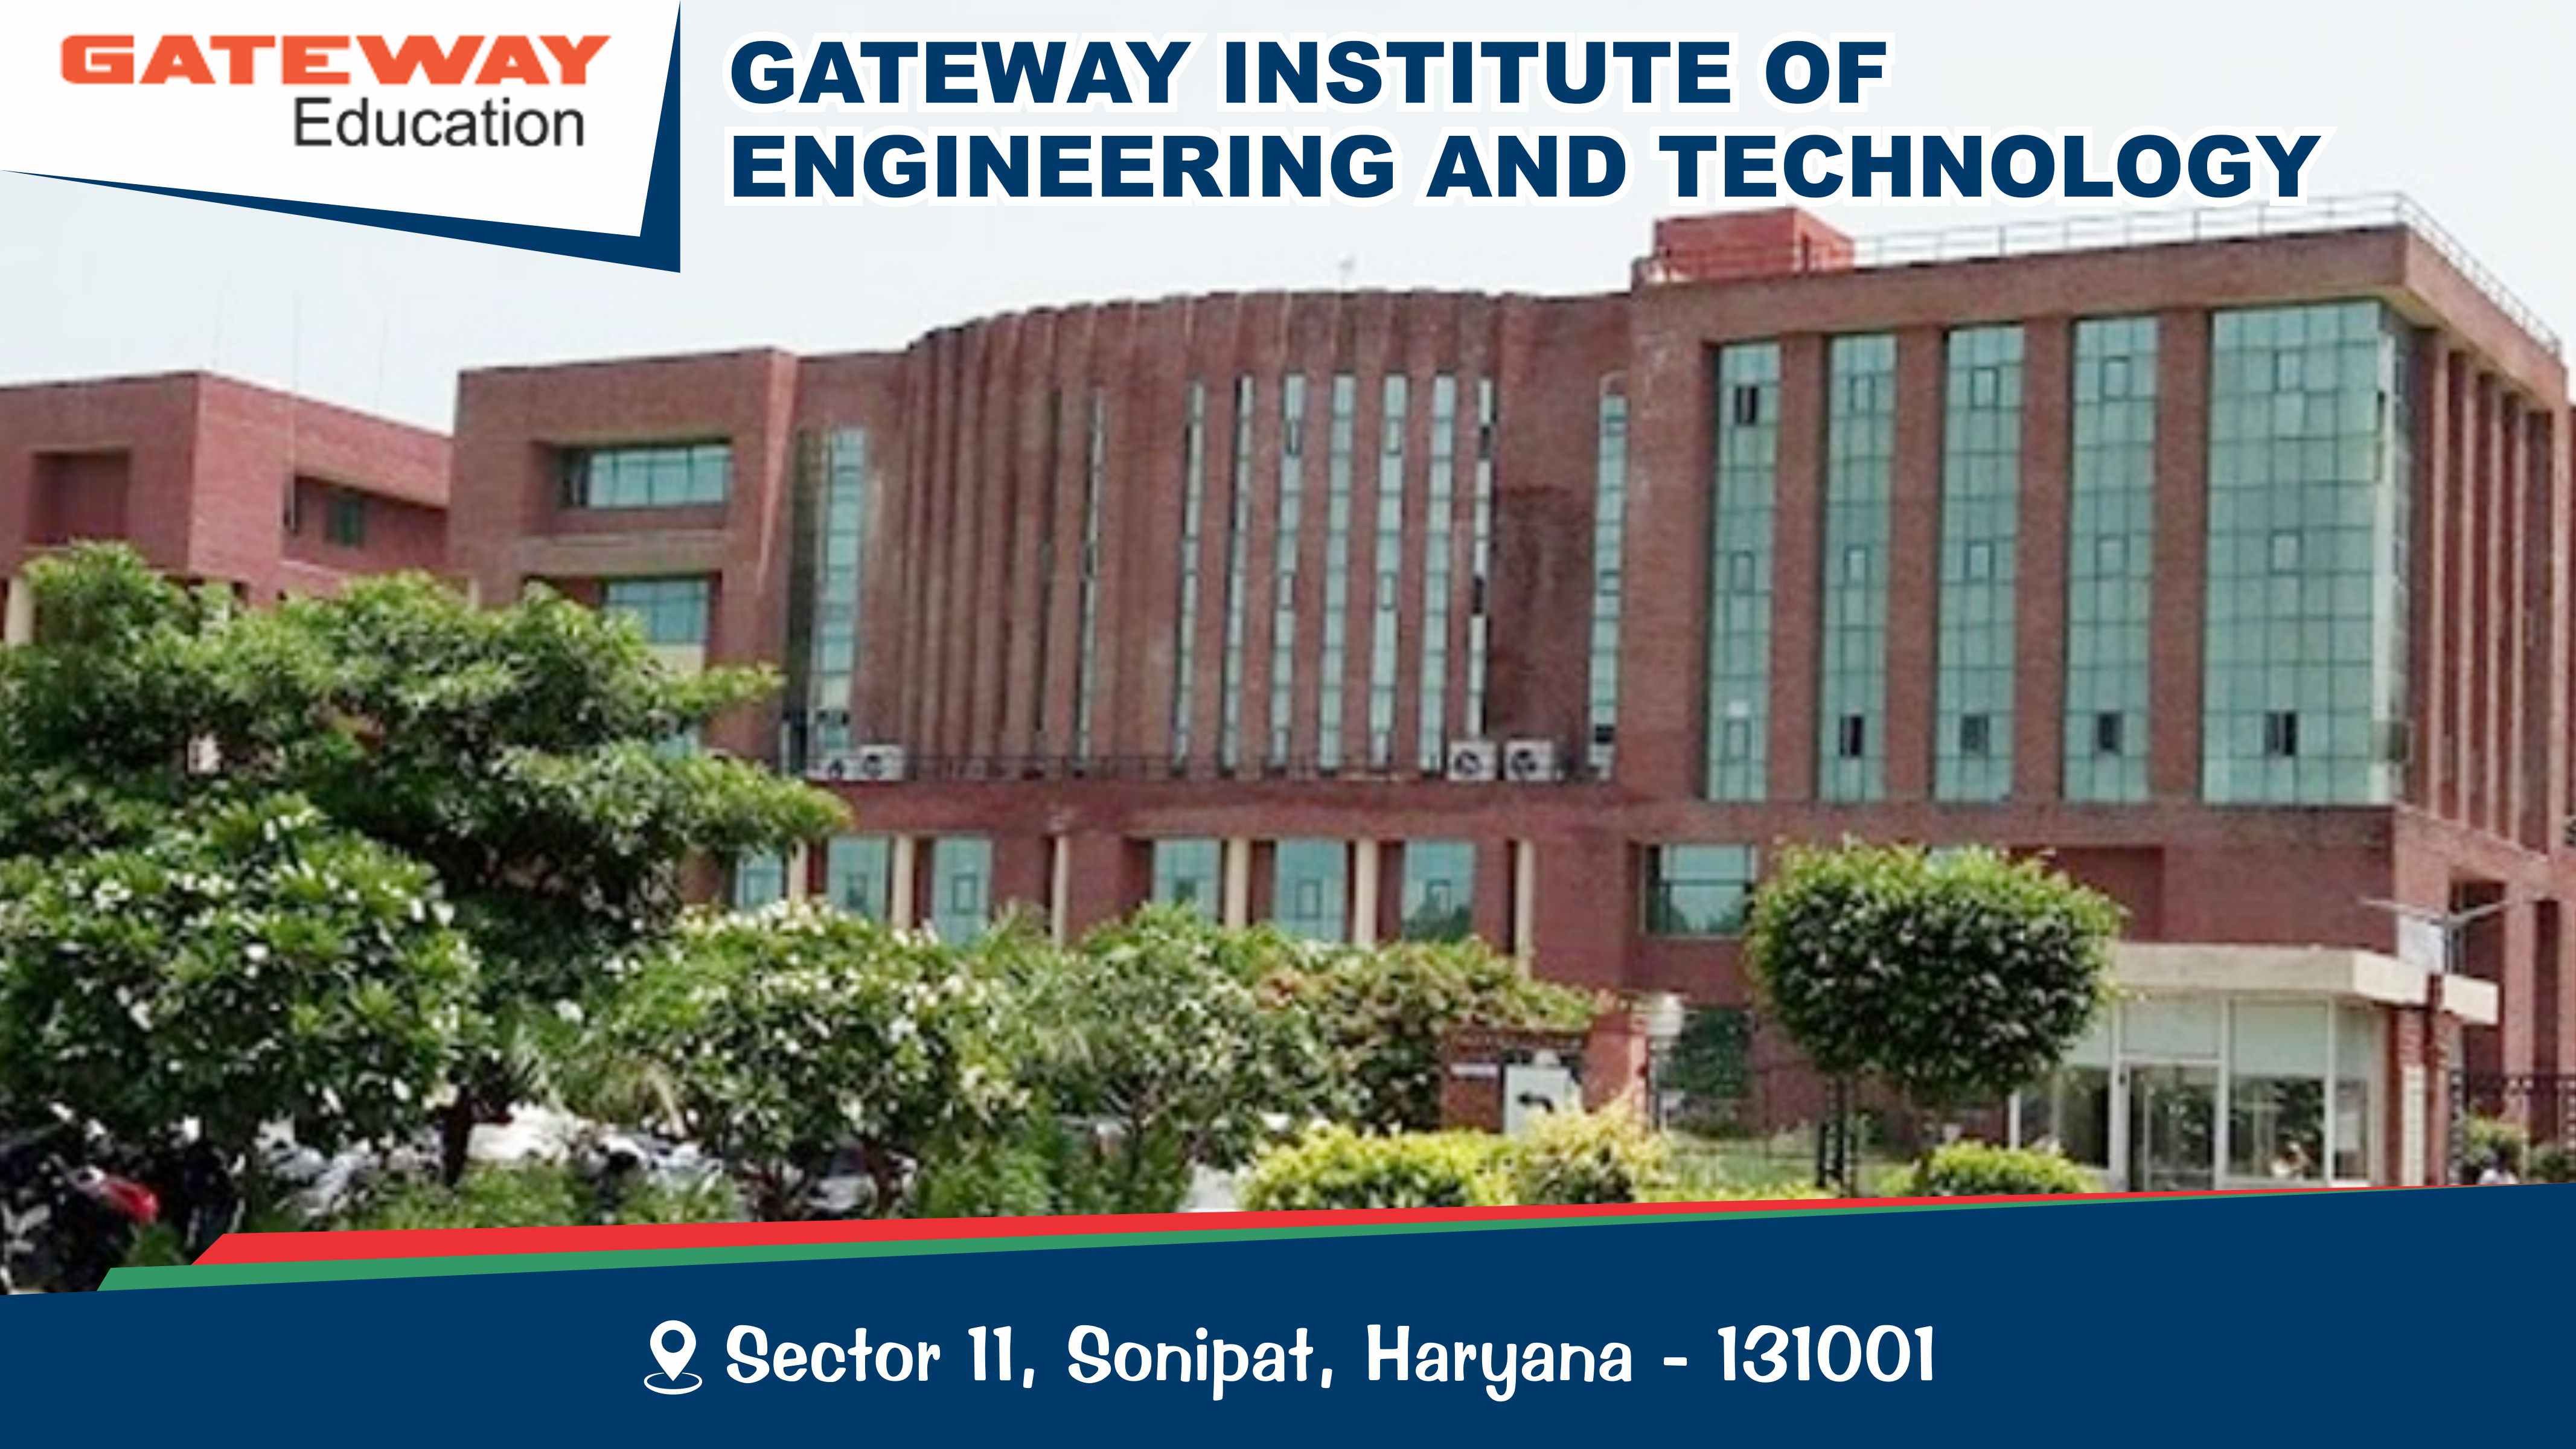 Out Side View of Gateway Institute of Engineering and Technology, Sonipat